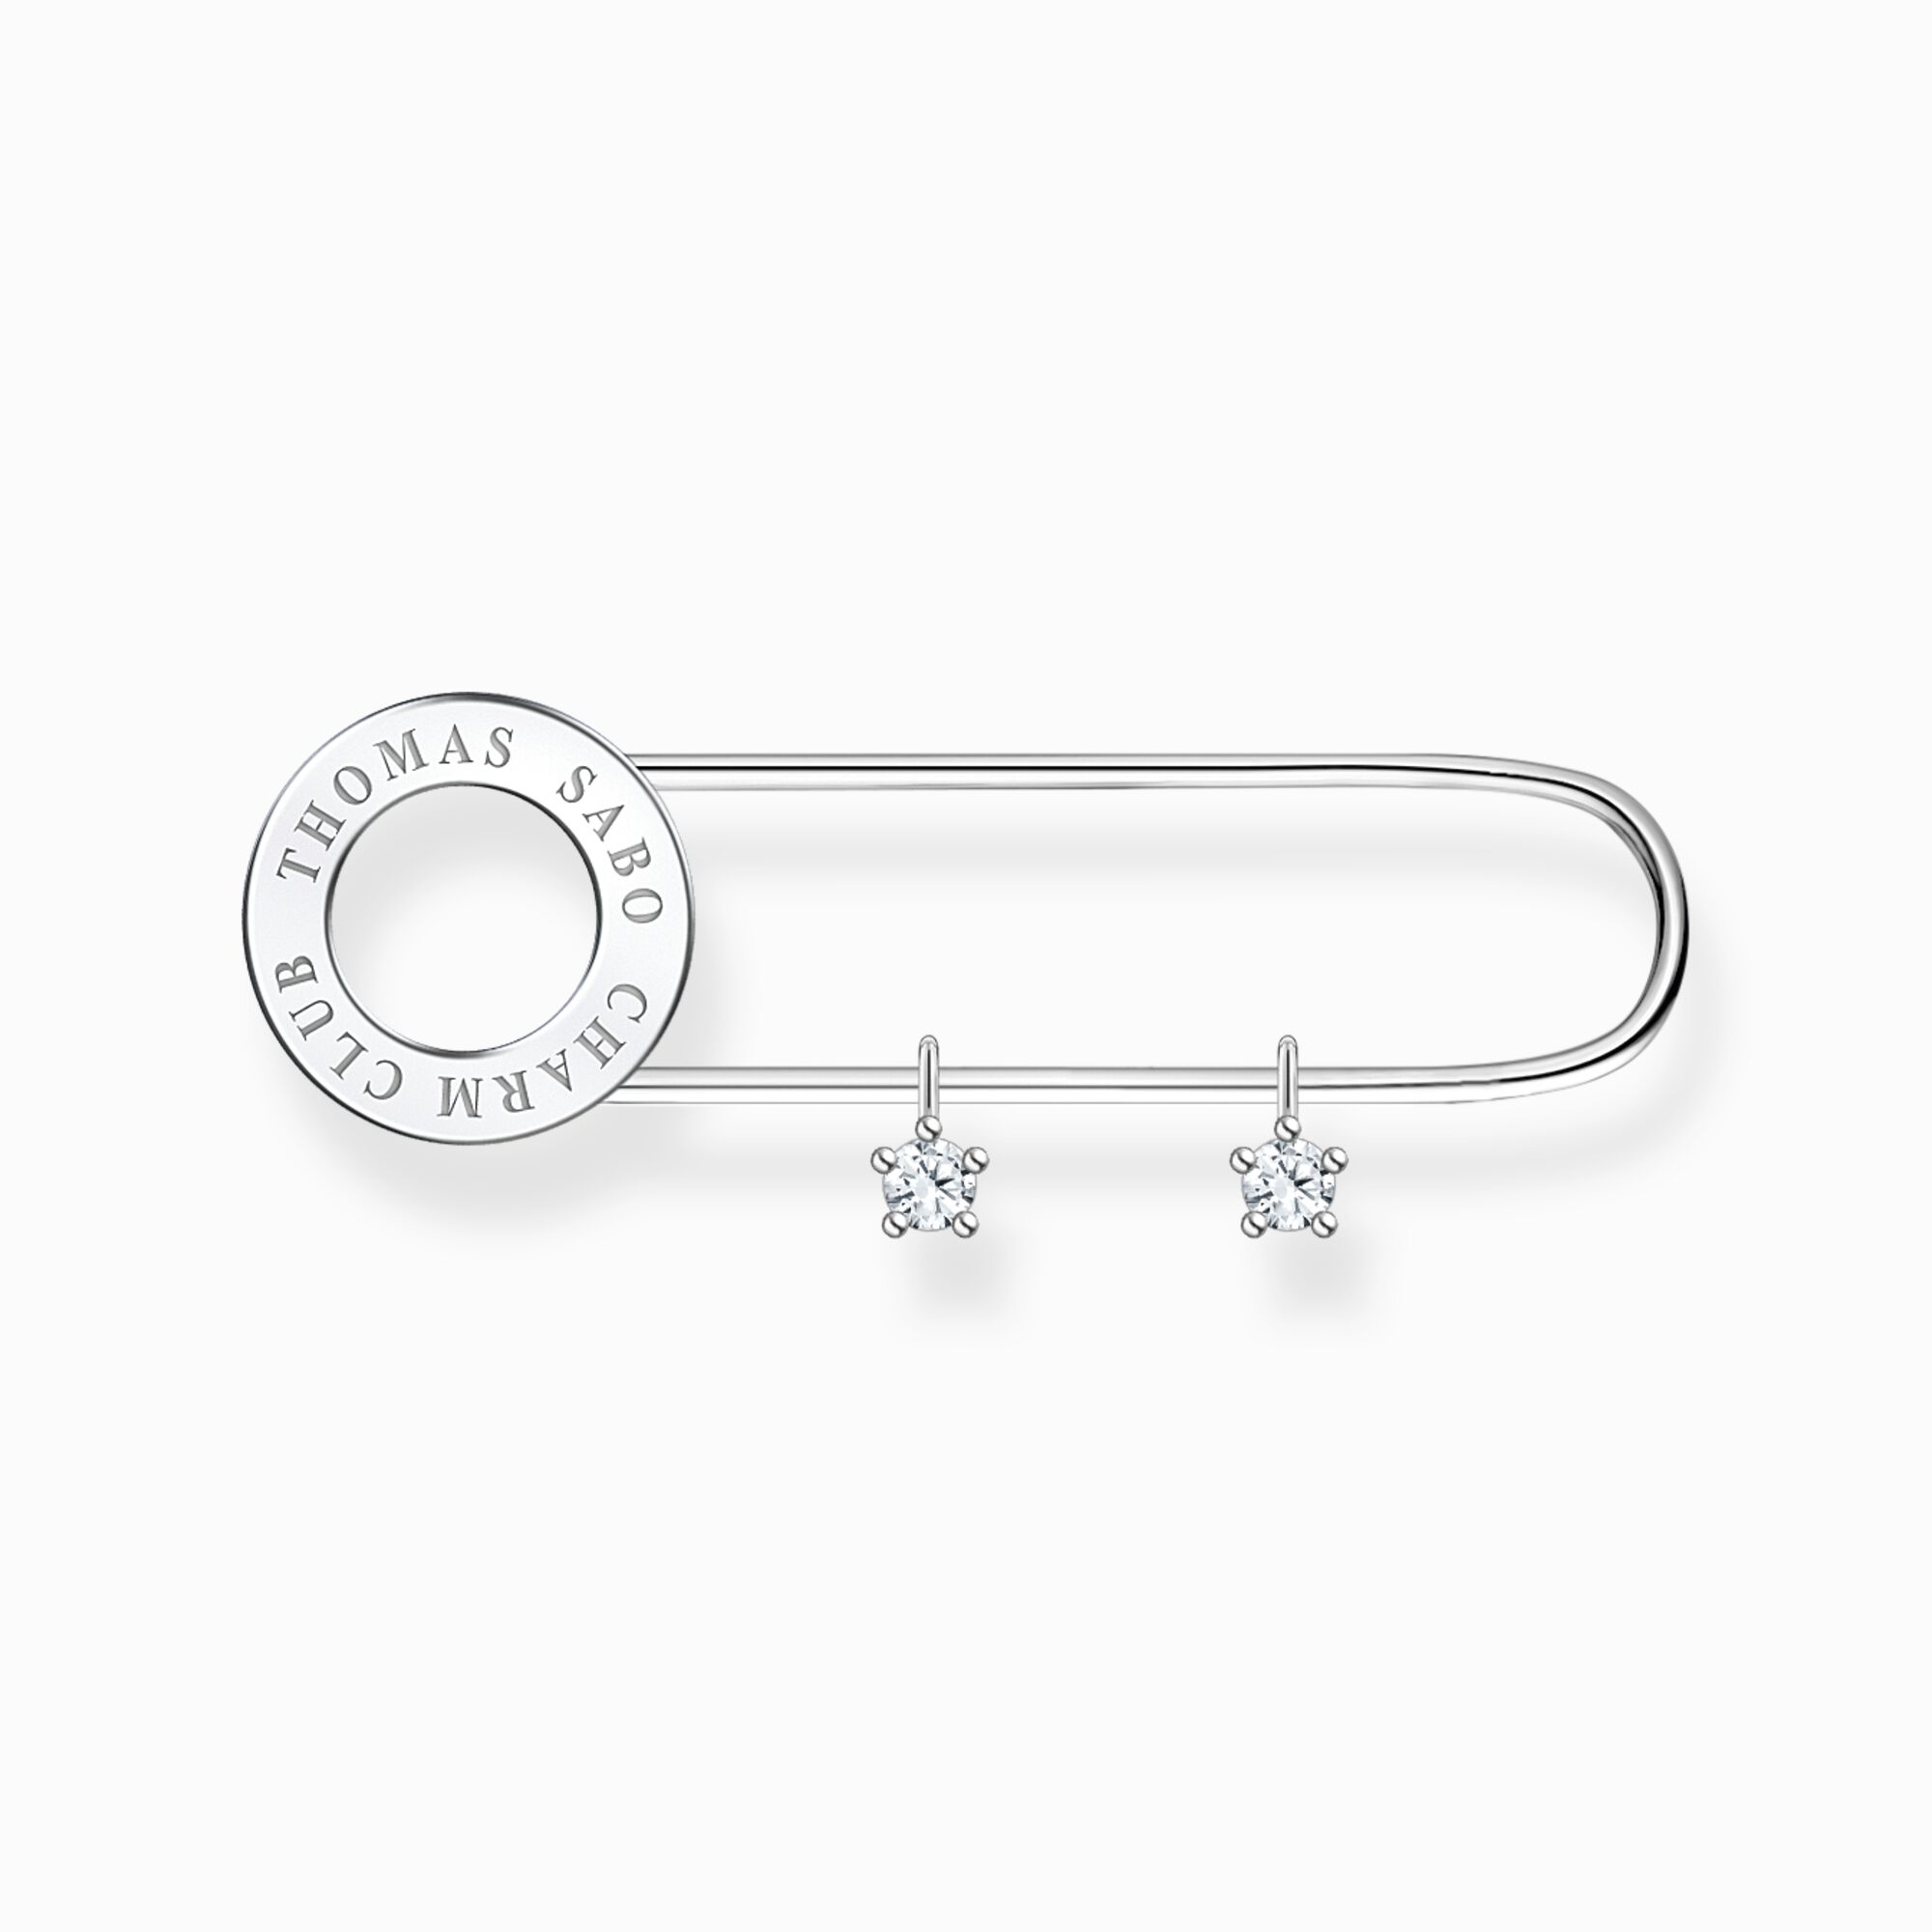 Brooch with stones silver from the Charming Collection collection in the THOMAS SABO online store